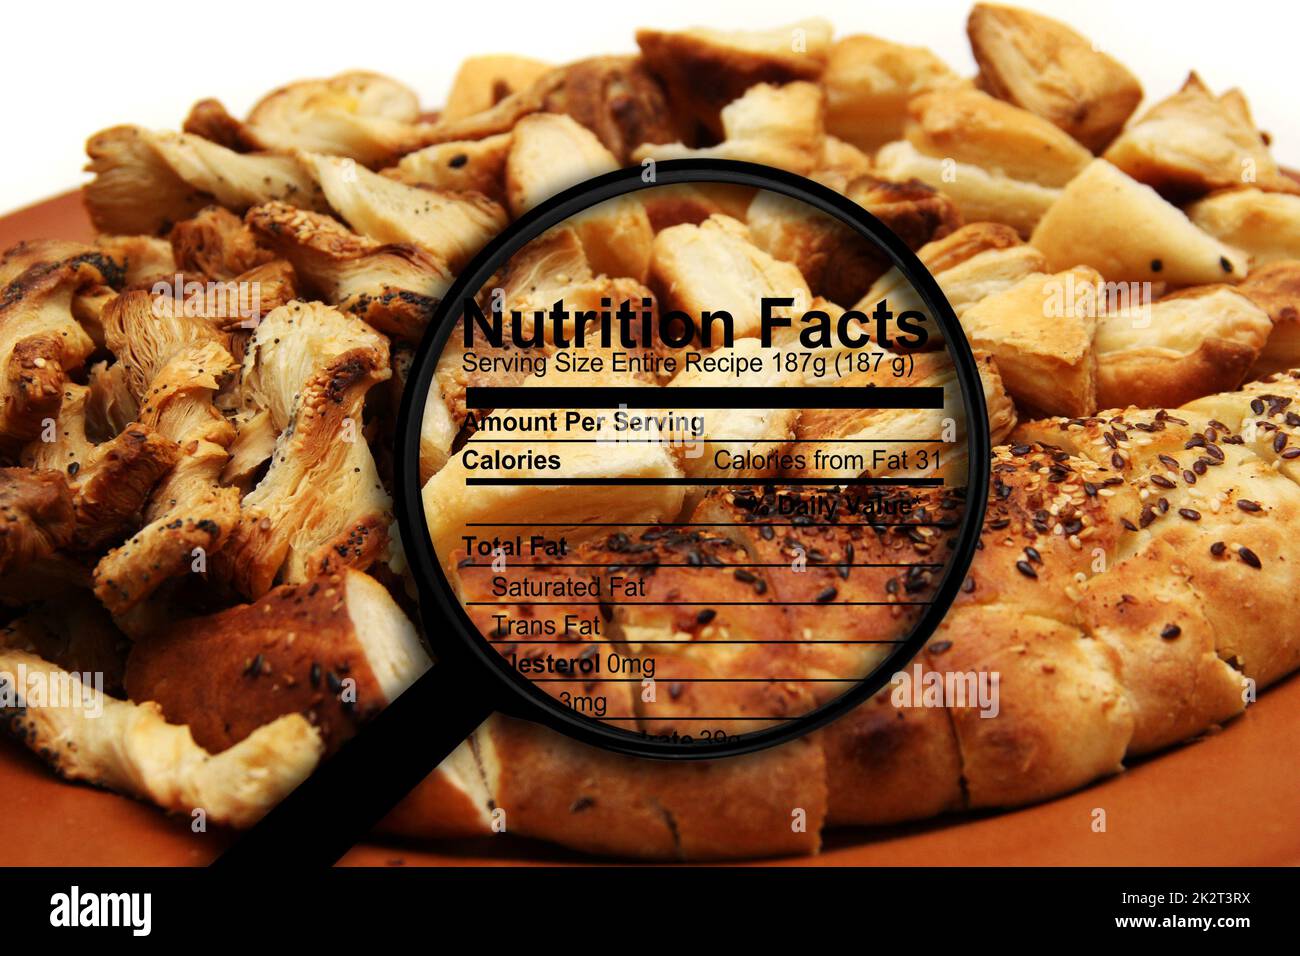 Nutrition facts on bread Stock Photo